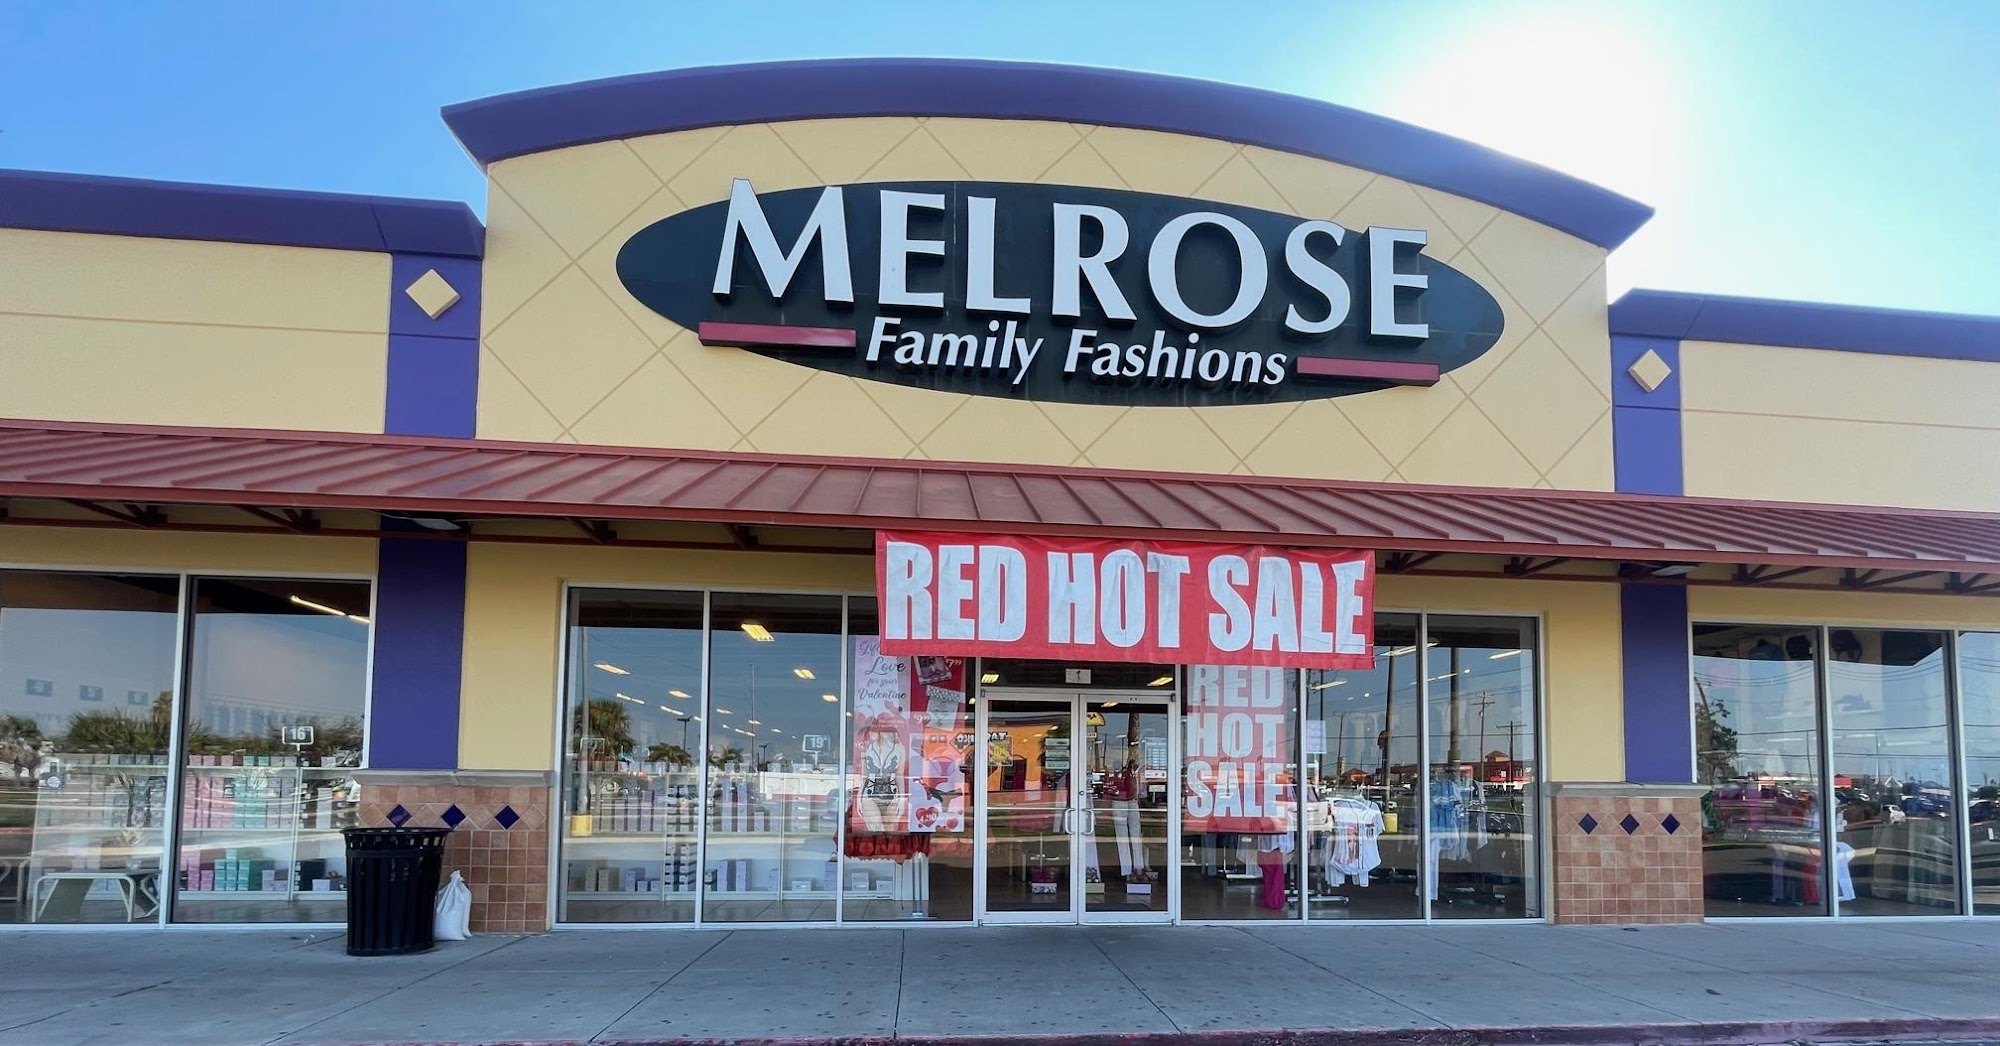 Melrose Family Fashions